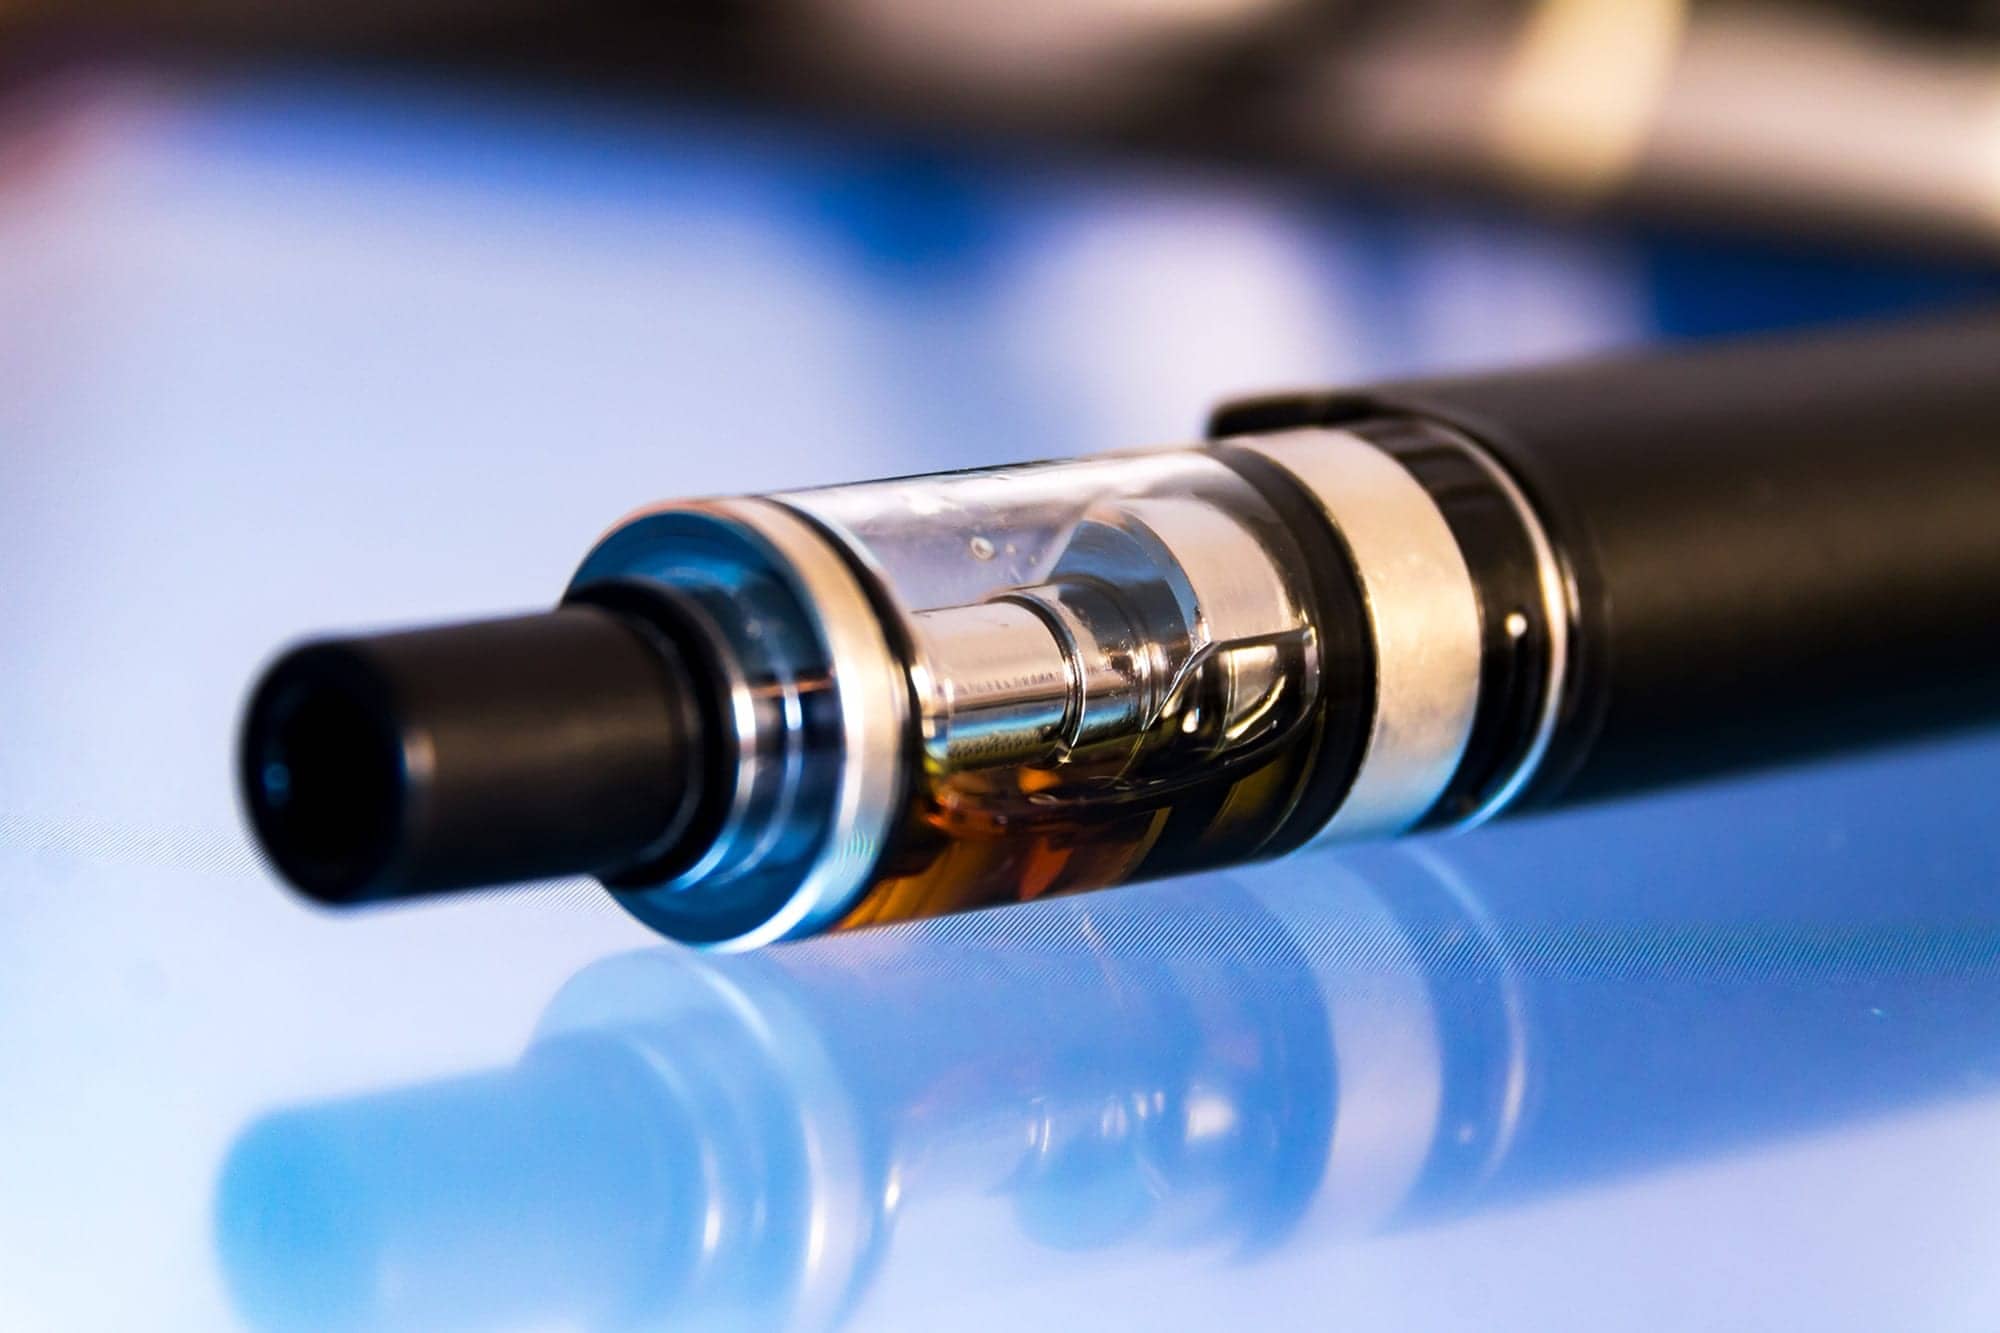 Study: Could Vaping Lead to Worse COVID Infections?